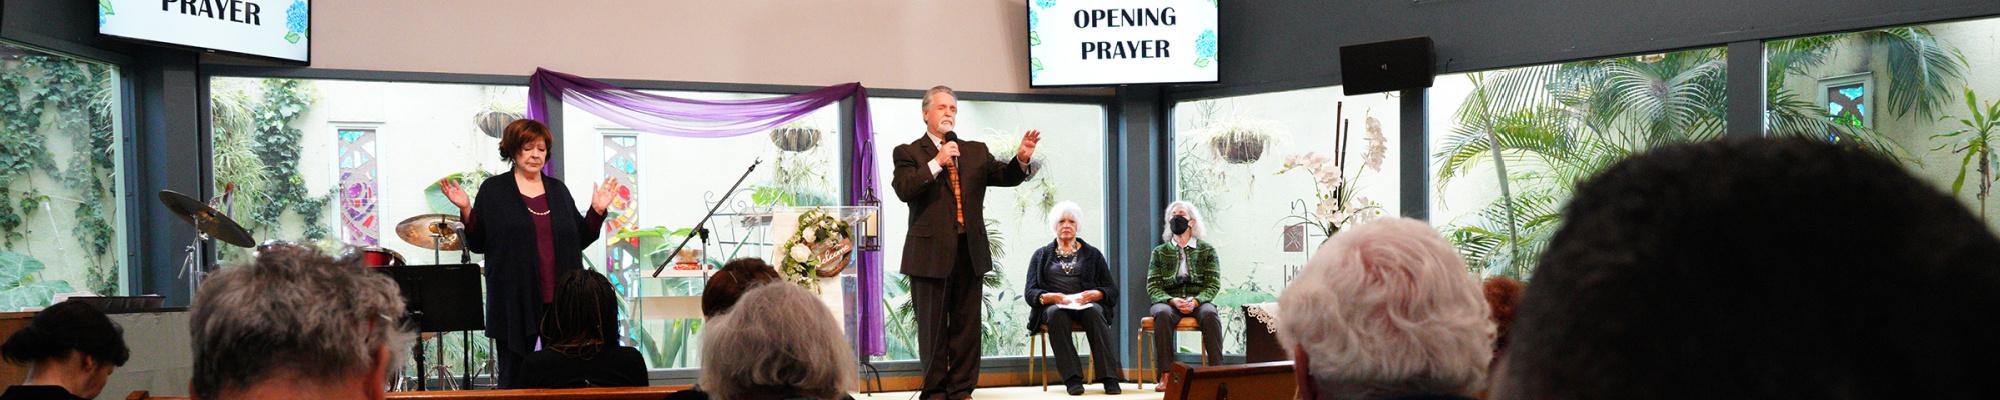 Image shows Rev. Greg Dorst with several others at the front of the sanctuary.